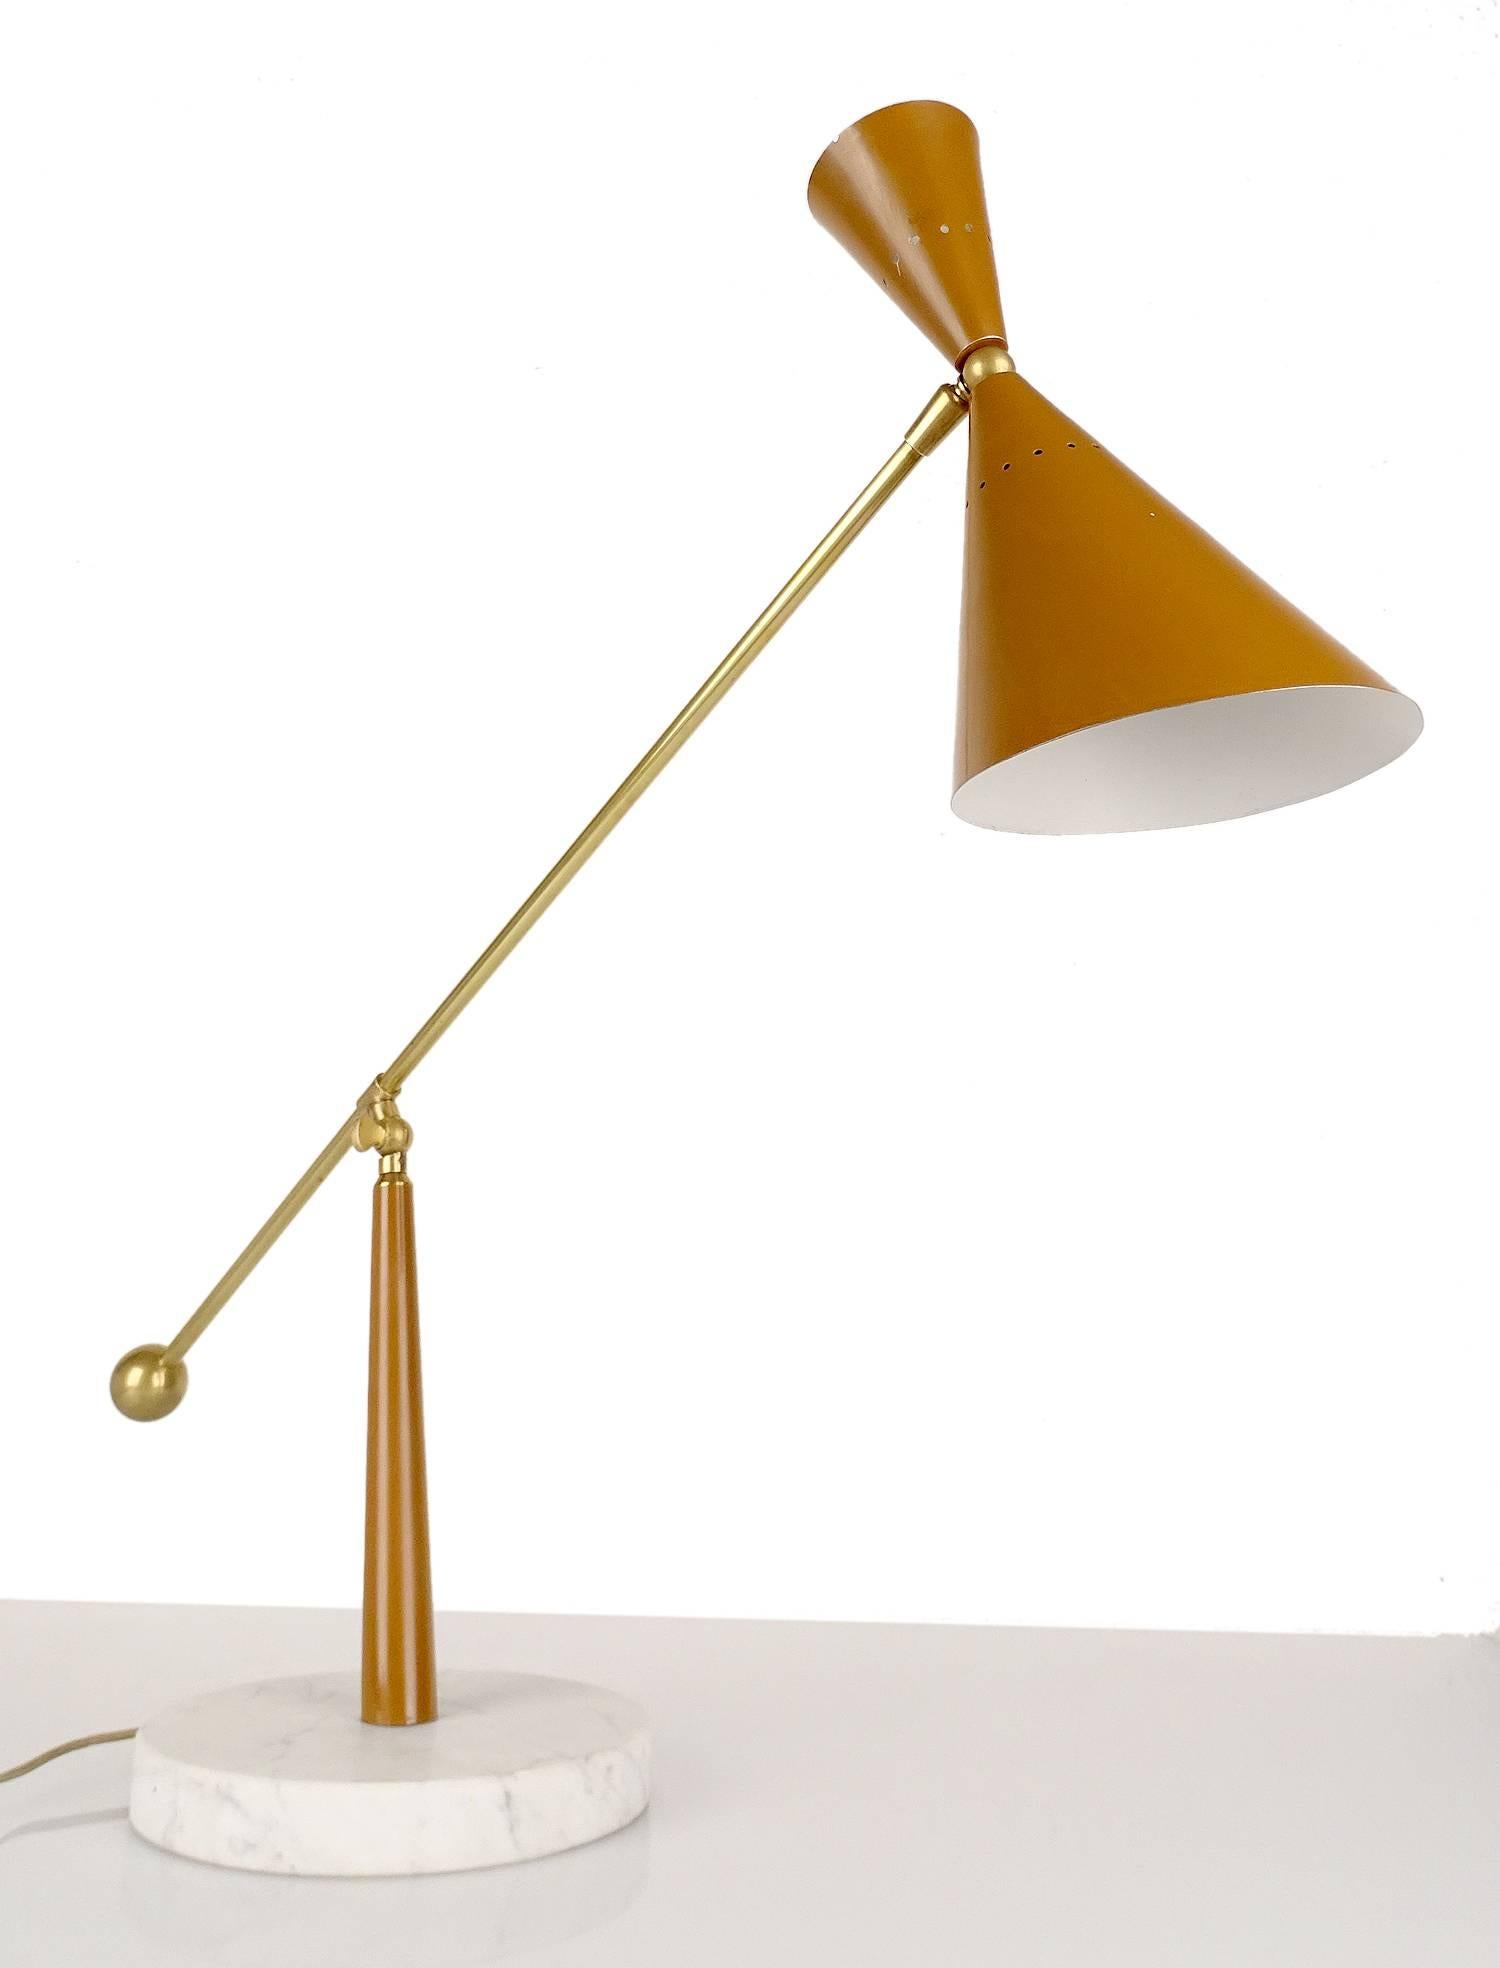 Very large adjustable desk lamp by Stilux Milano, featuring a diabolo double reflector (only bottom is lit up), on a large brass stem with counterweight.
conical enameled support on round streaked marble base

One standard size bulb @ 60 watts,